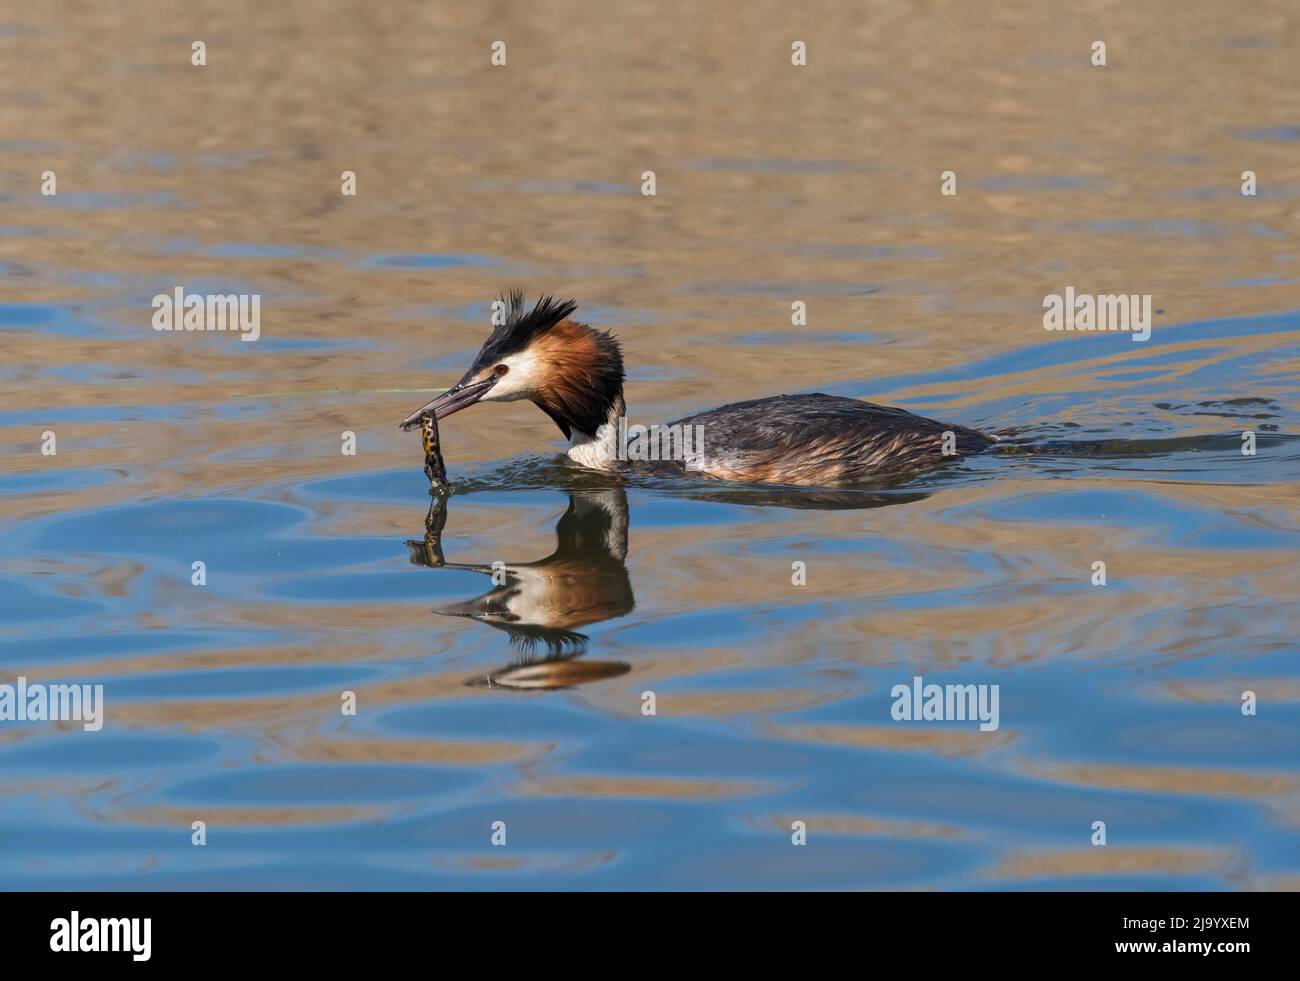 Great crested grebe, Podiceps cristatus, with Great Crested Newt, Lancashire, UK Stock Photo